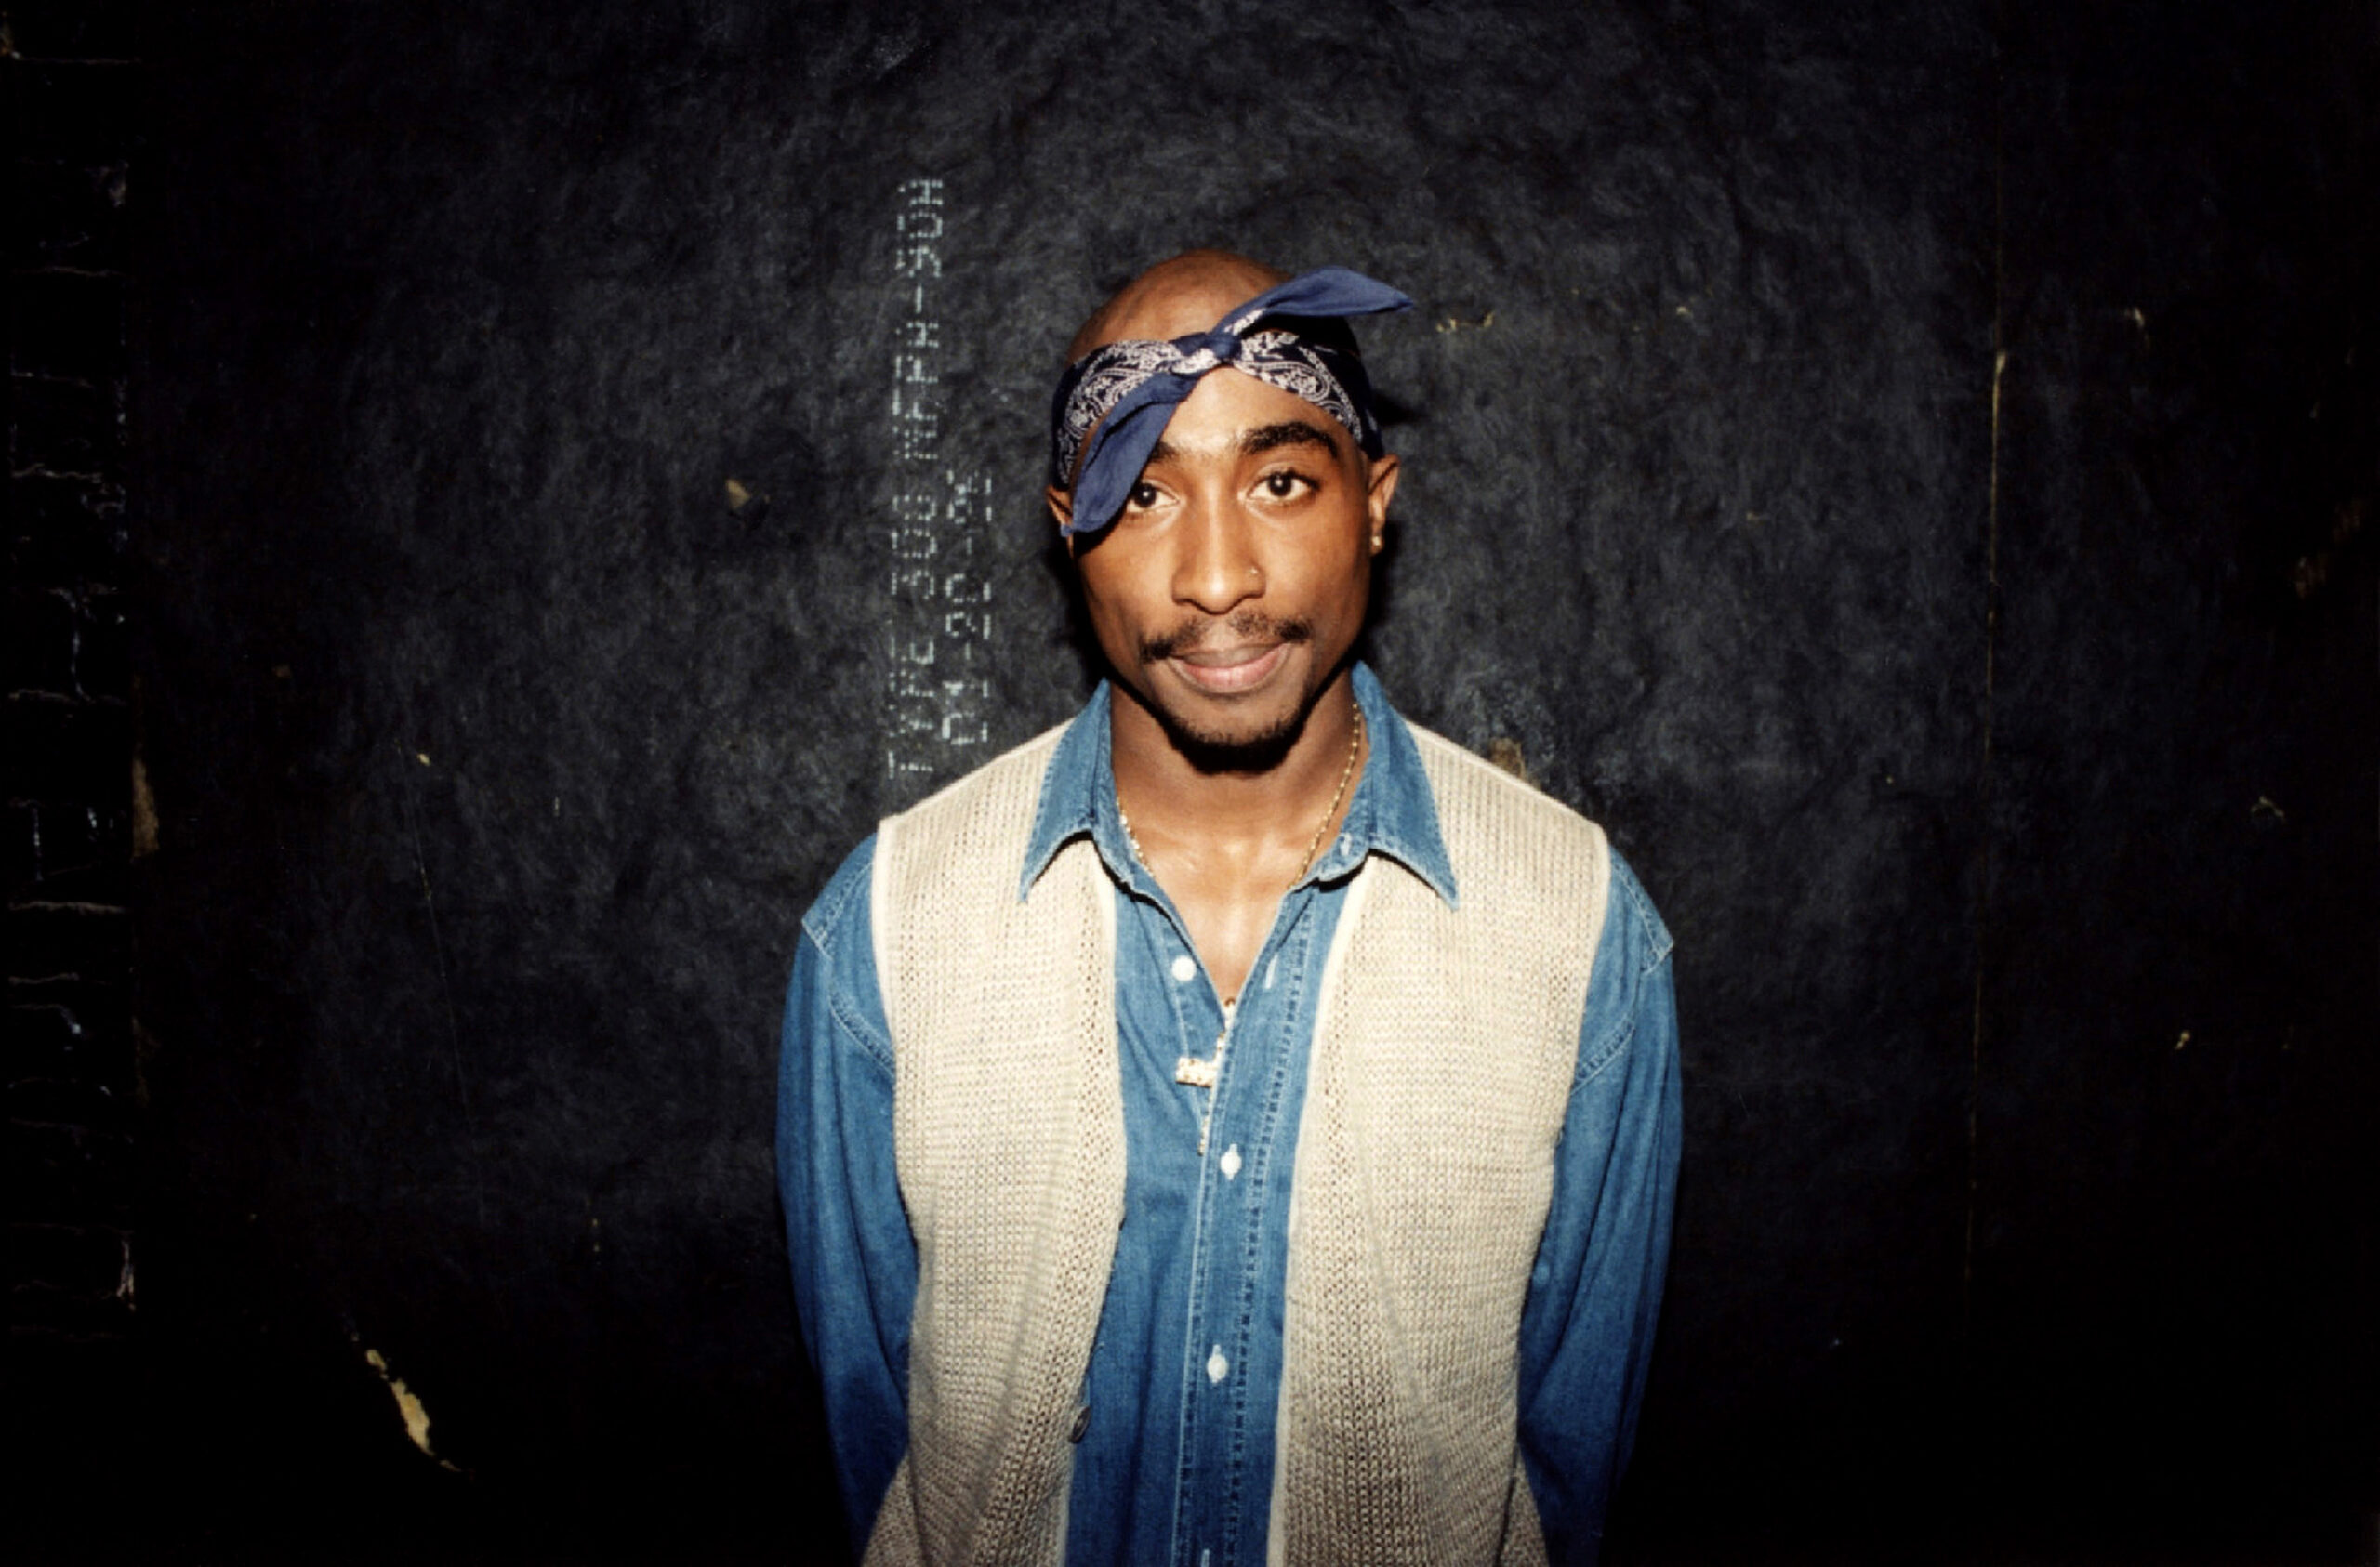 Tupac photo sparks lawsuit against Universal Music